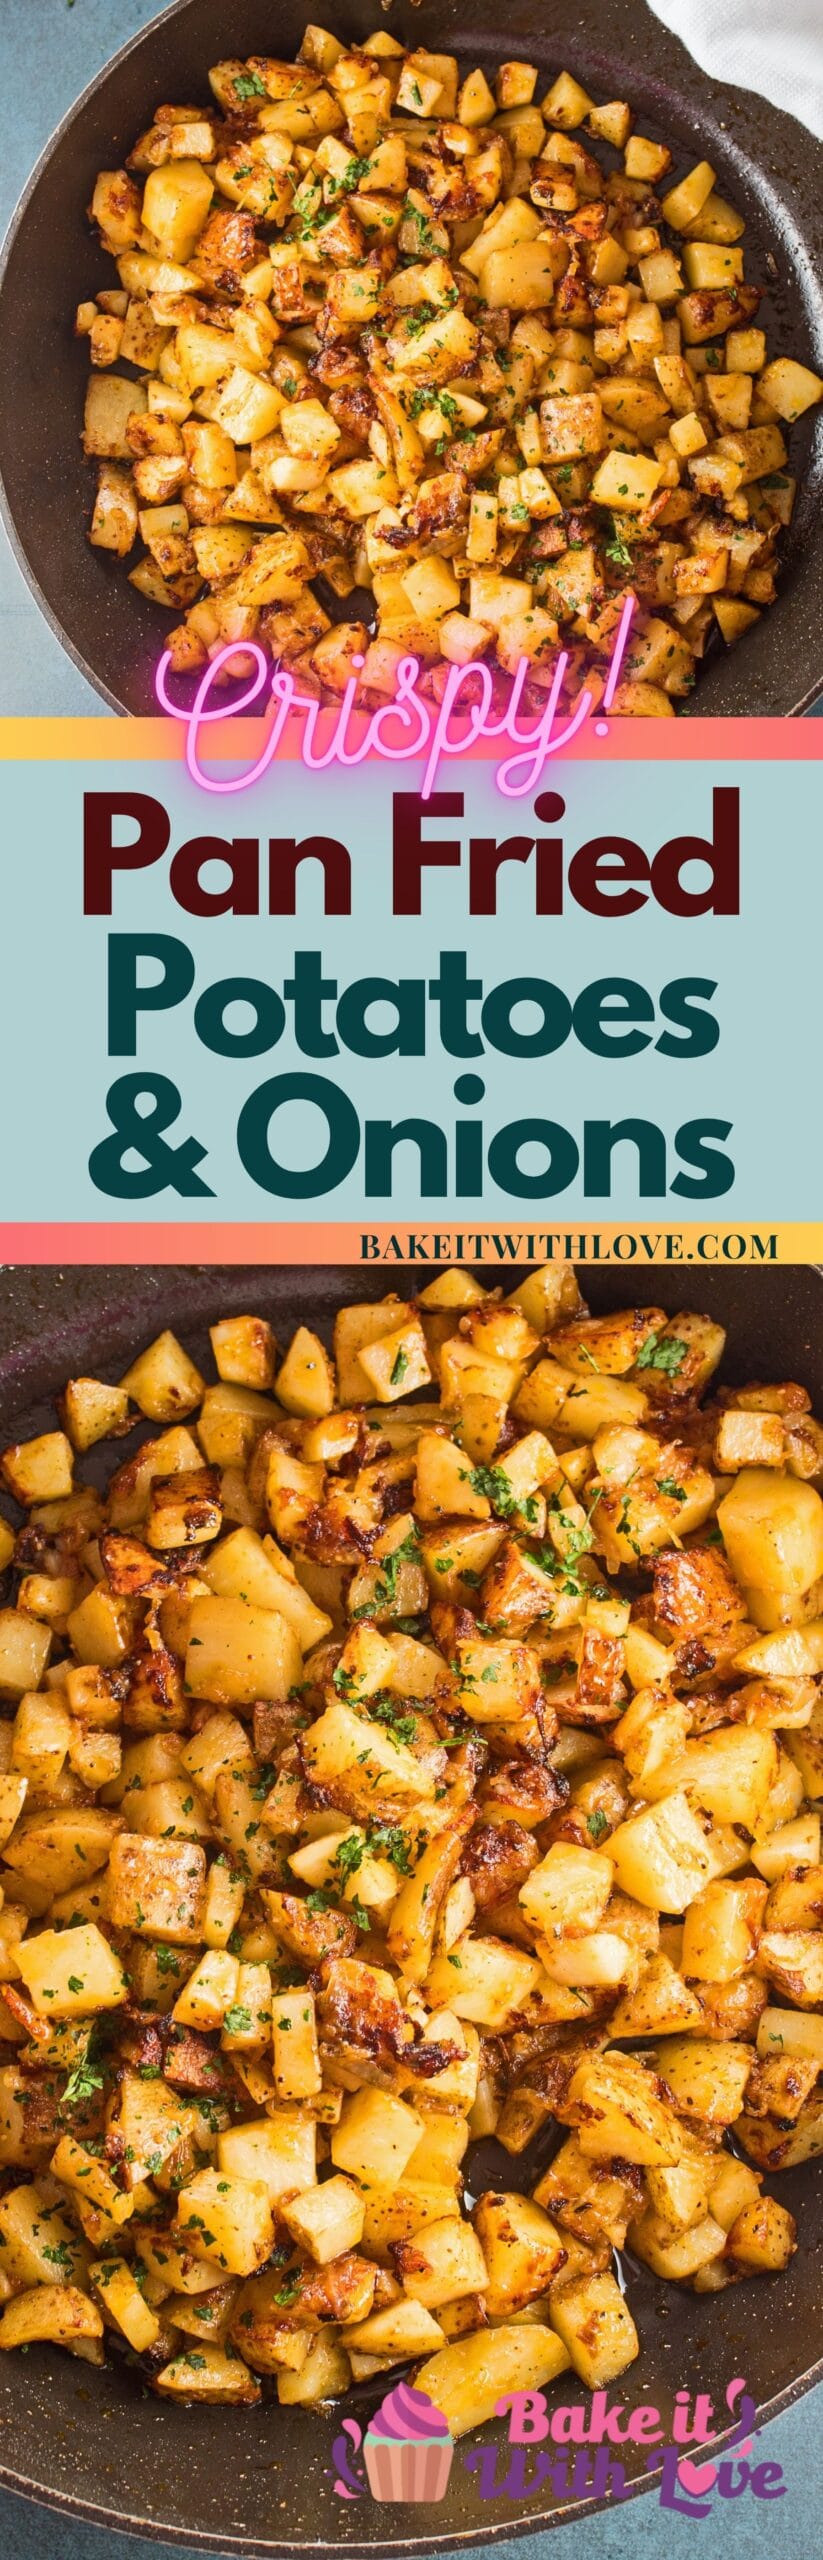 Easy Pan Fried Potatoes & Onions: Delicious & Quick Side Dish